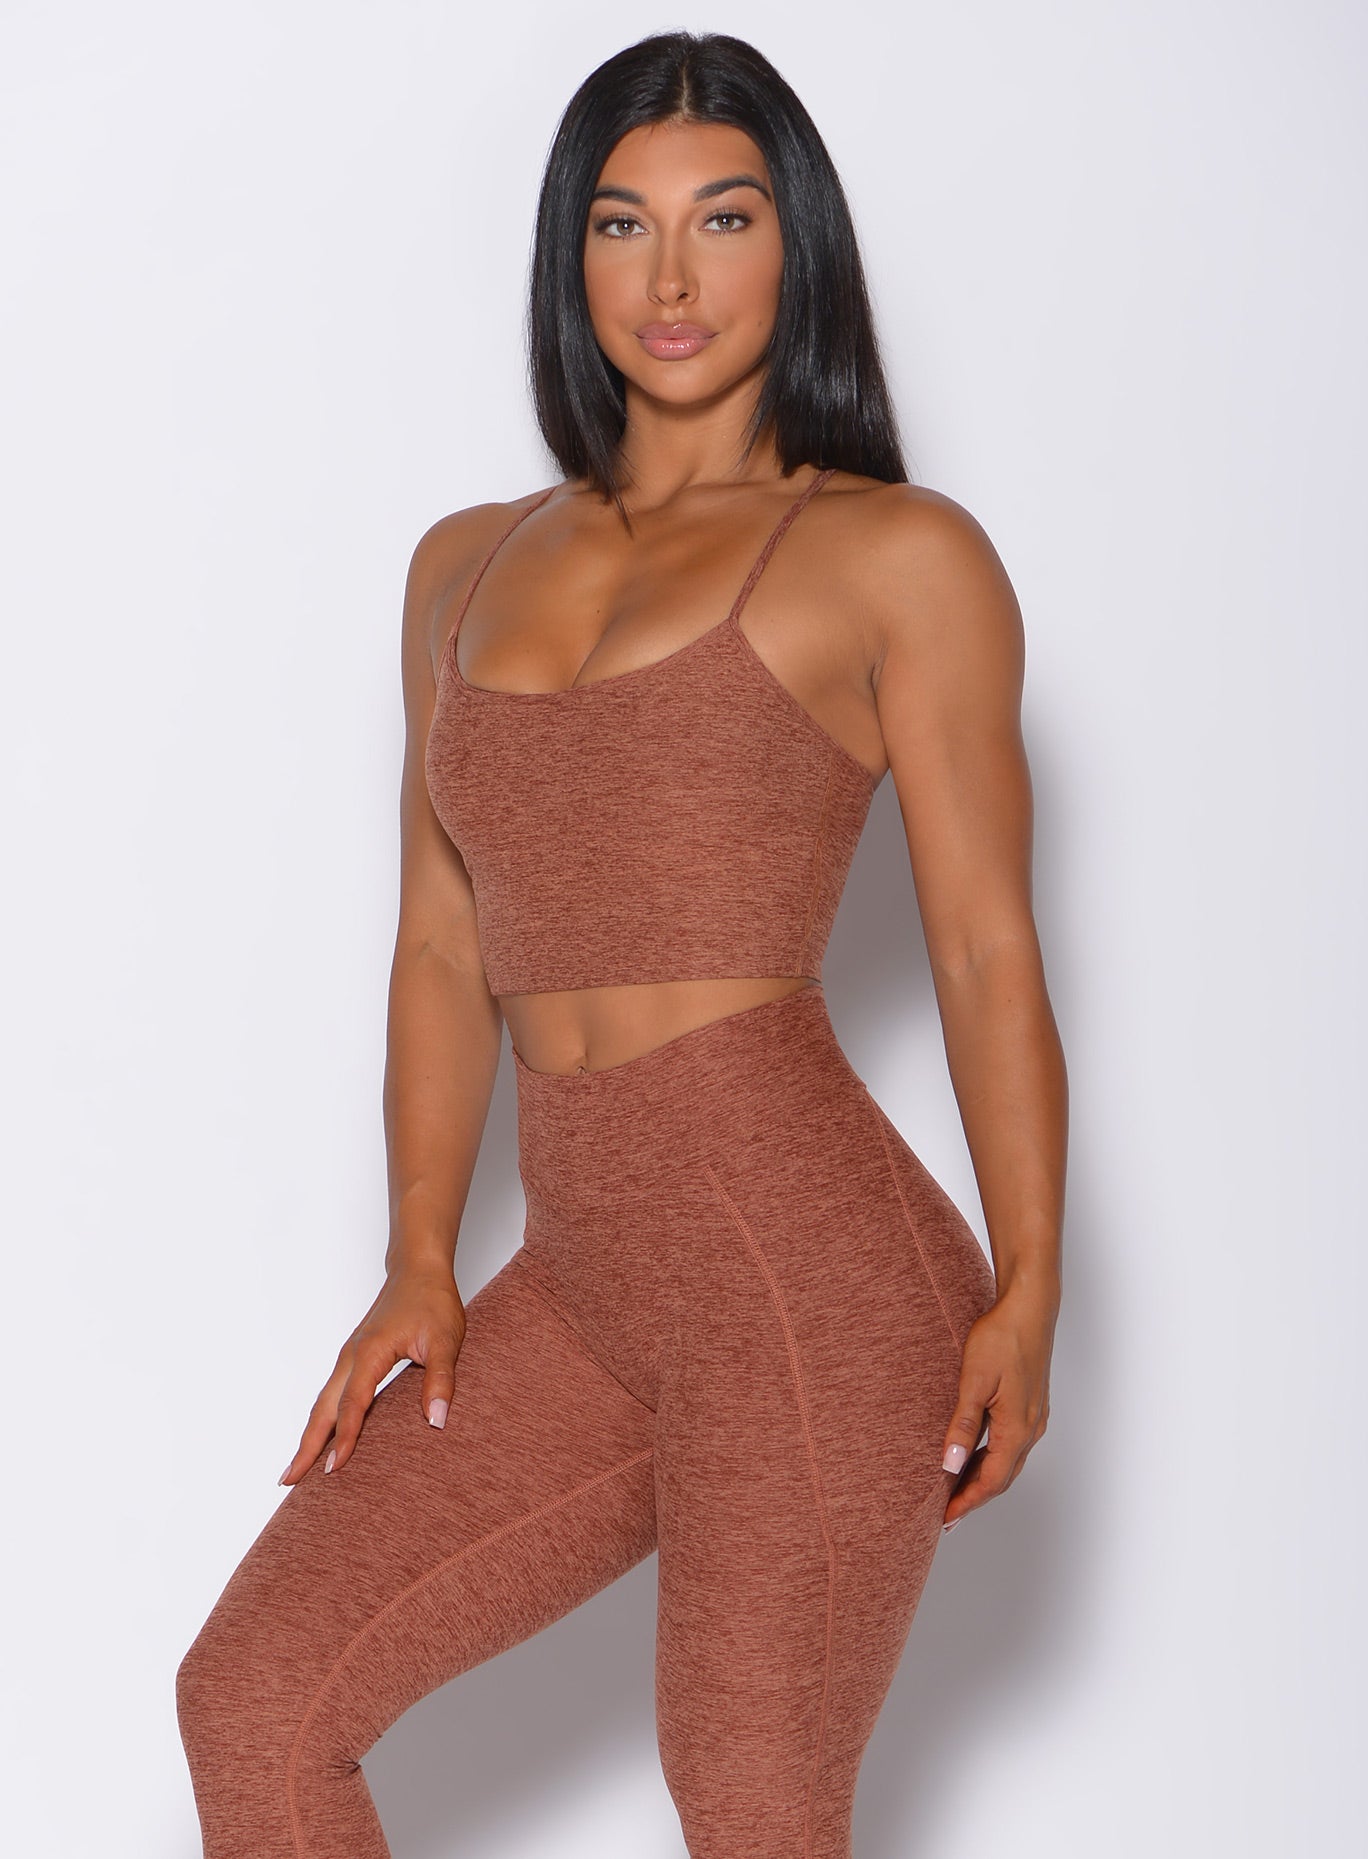 Front profile view of a model facing forward wearing our relax long bra in spiced chai color and a matching leggings